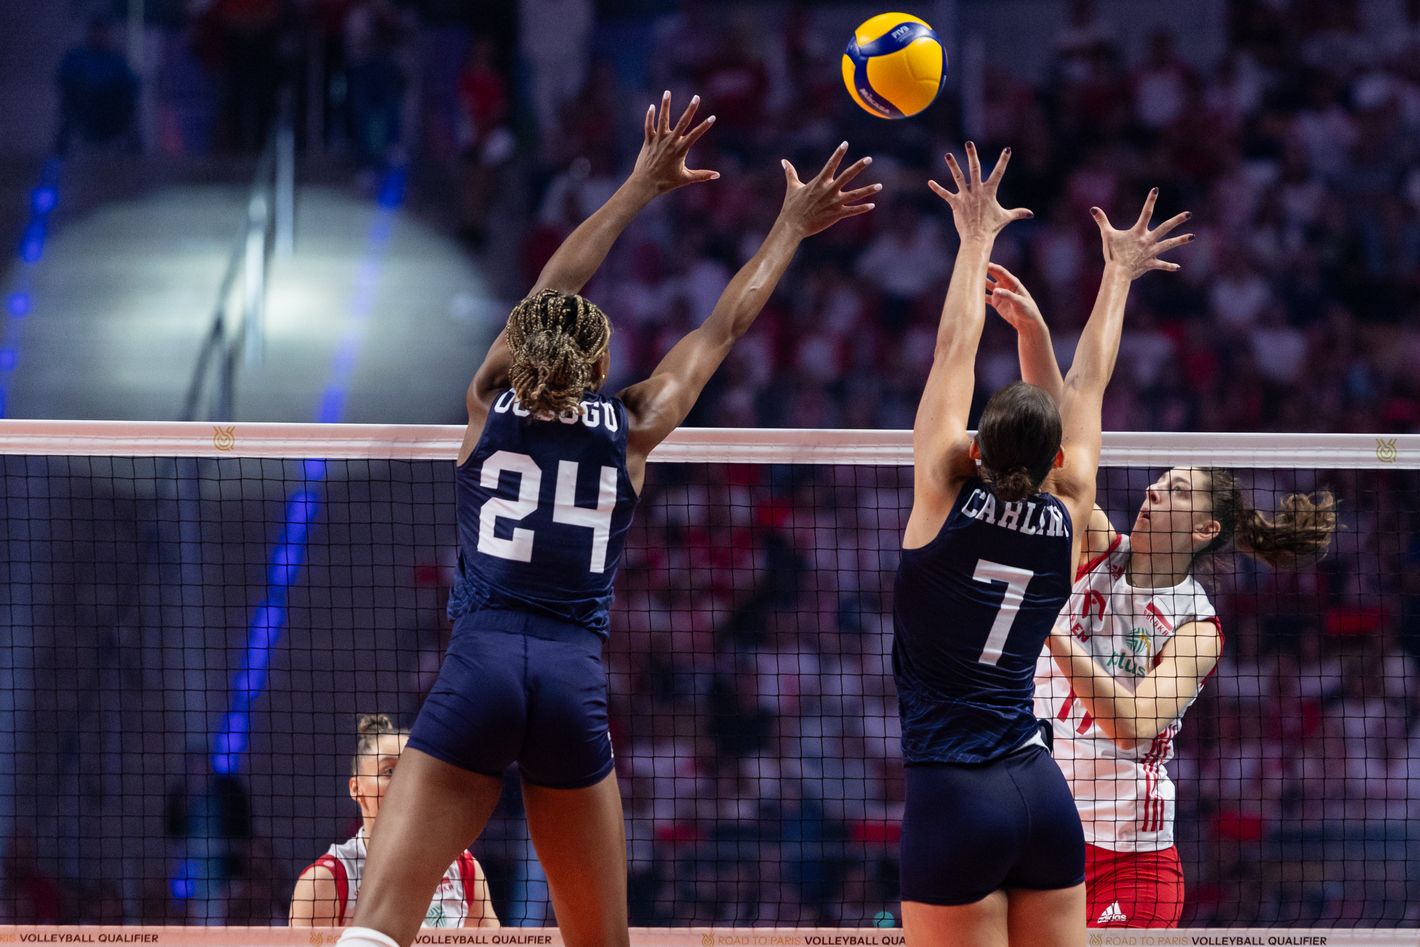 Are You Ready to Watch Olympic Volleyball?